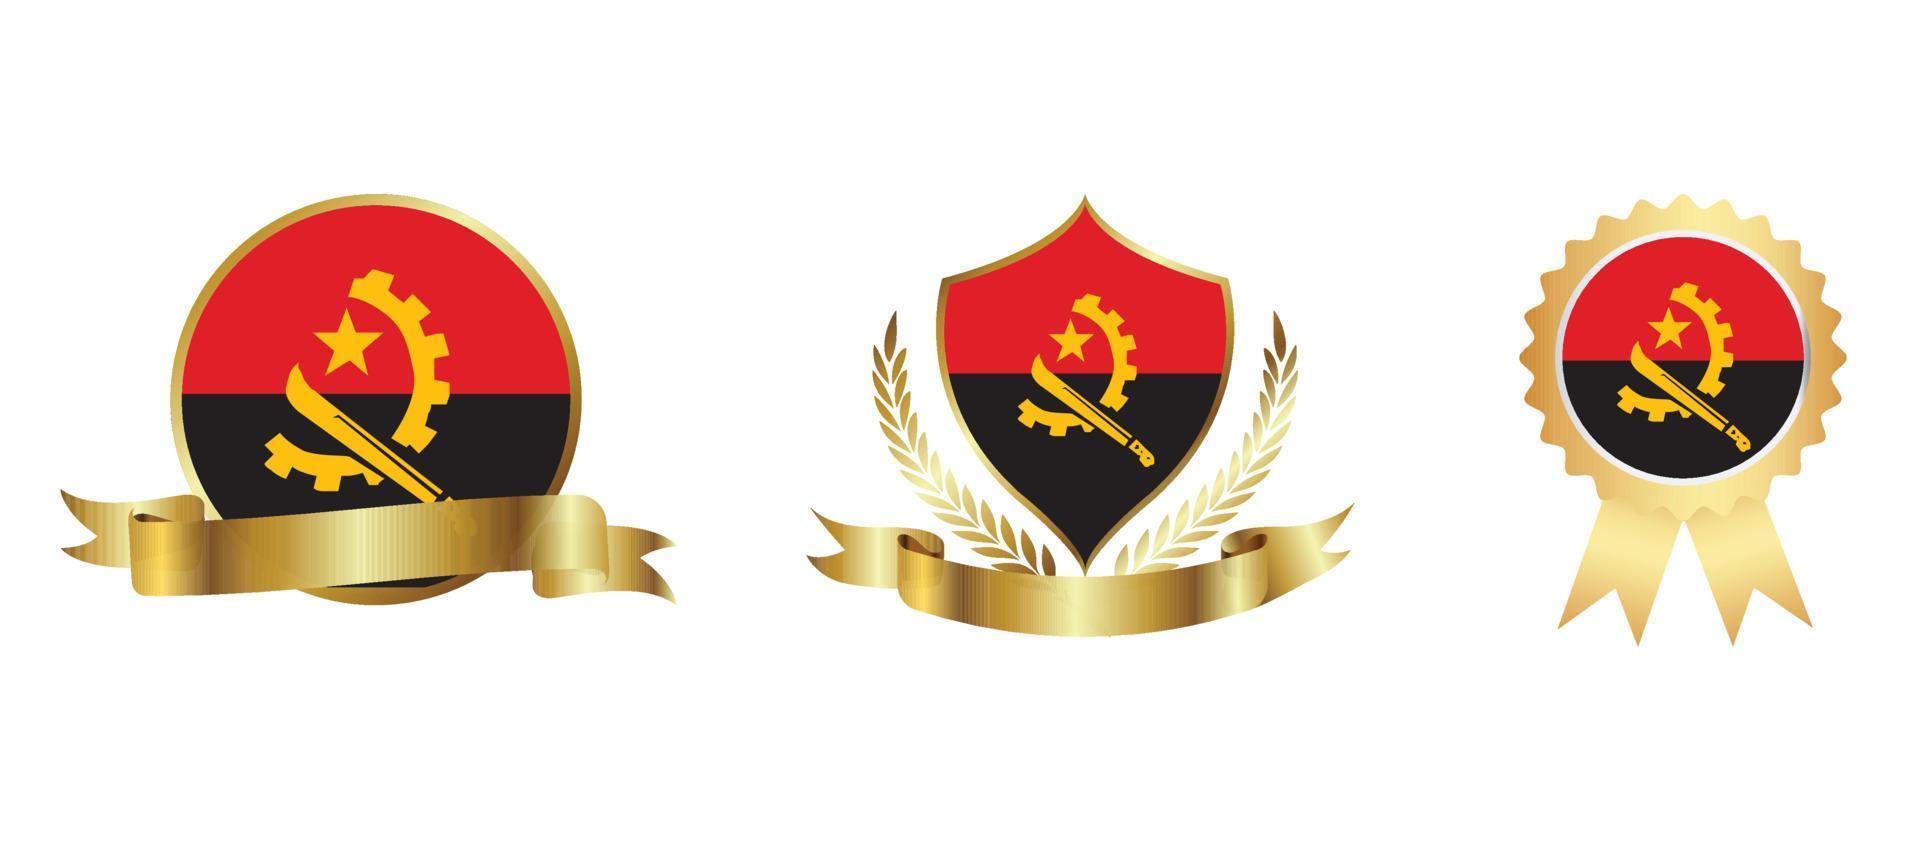 angola flag icon . web icon set . icons collection flat. Simple vector illustration.